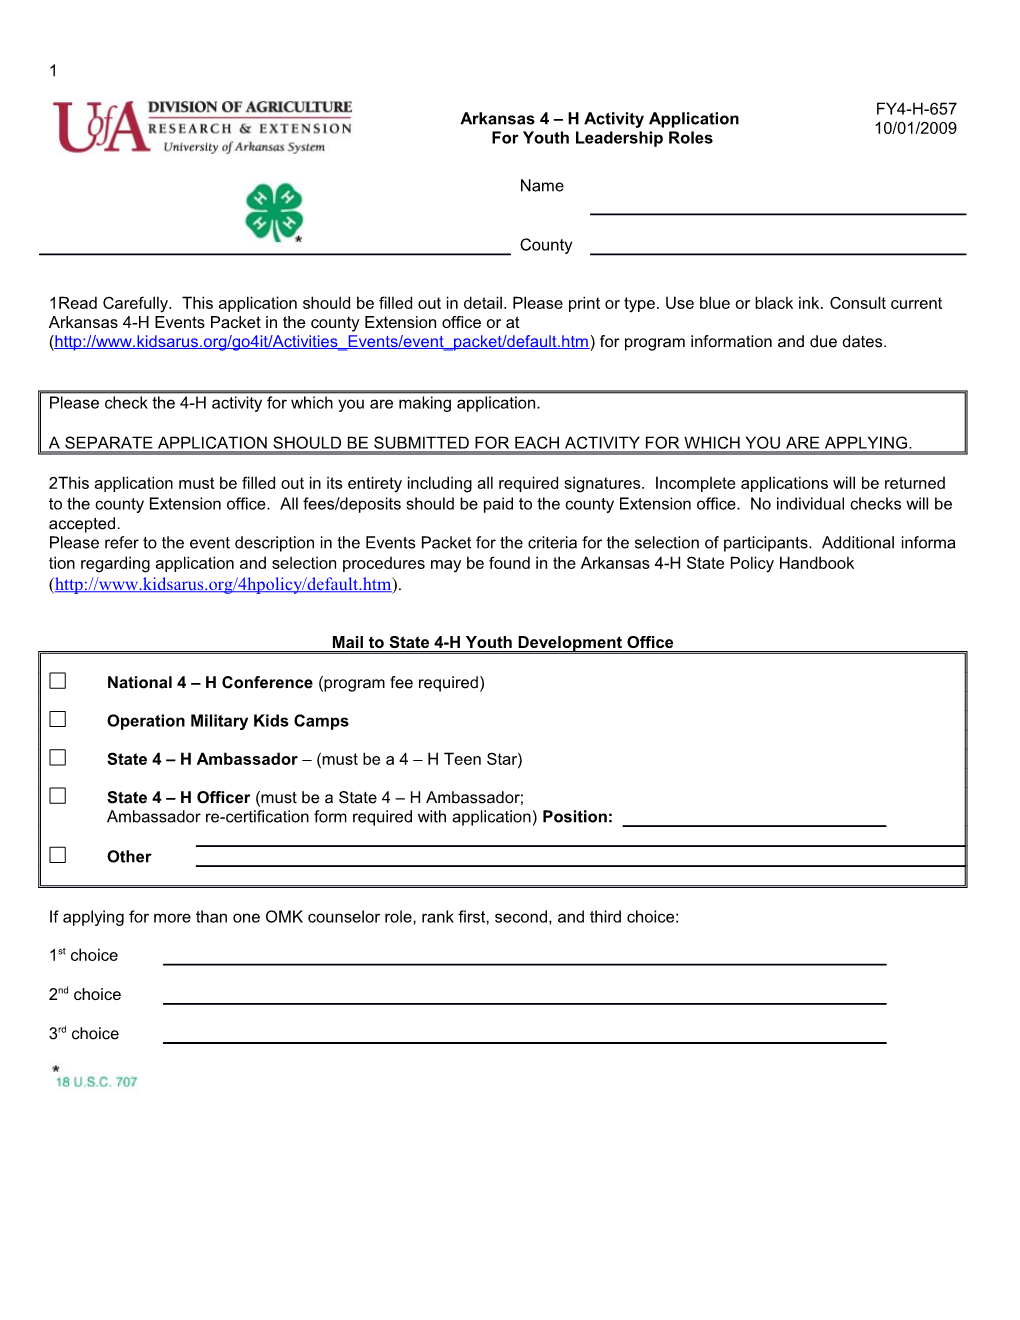 Mail to State 4-H Youth Development Office